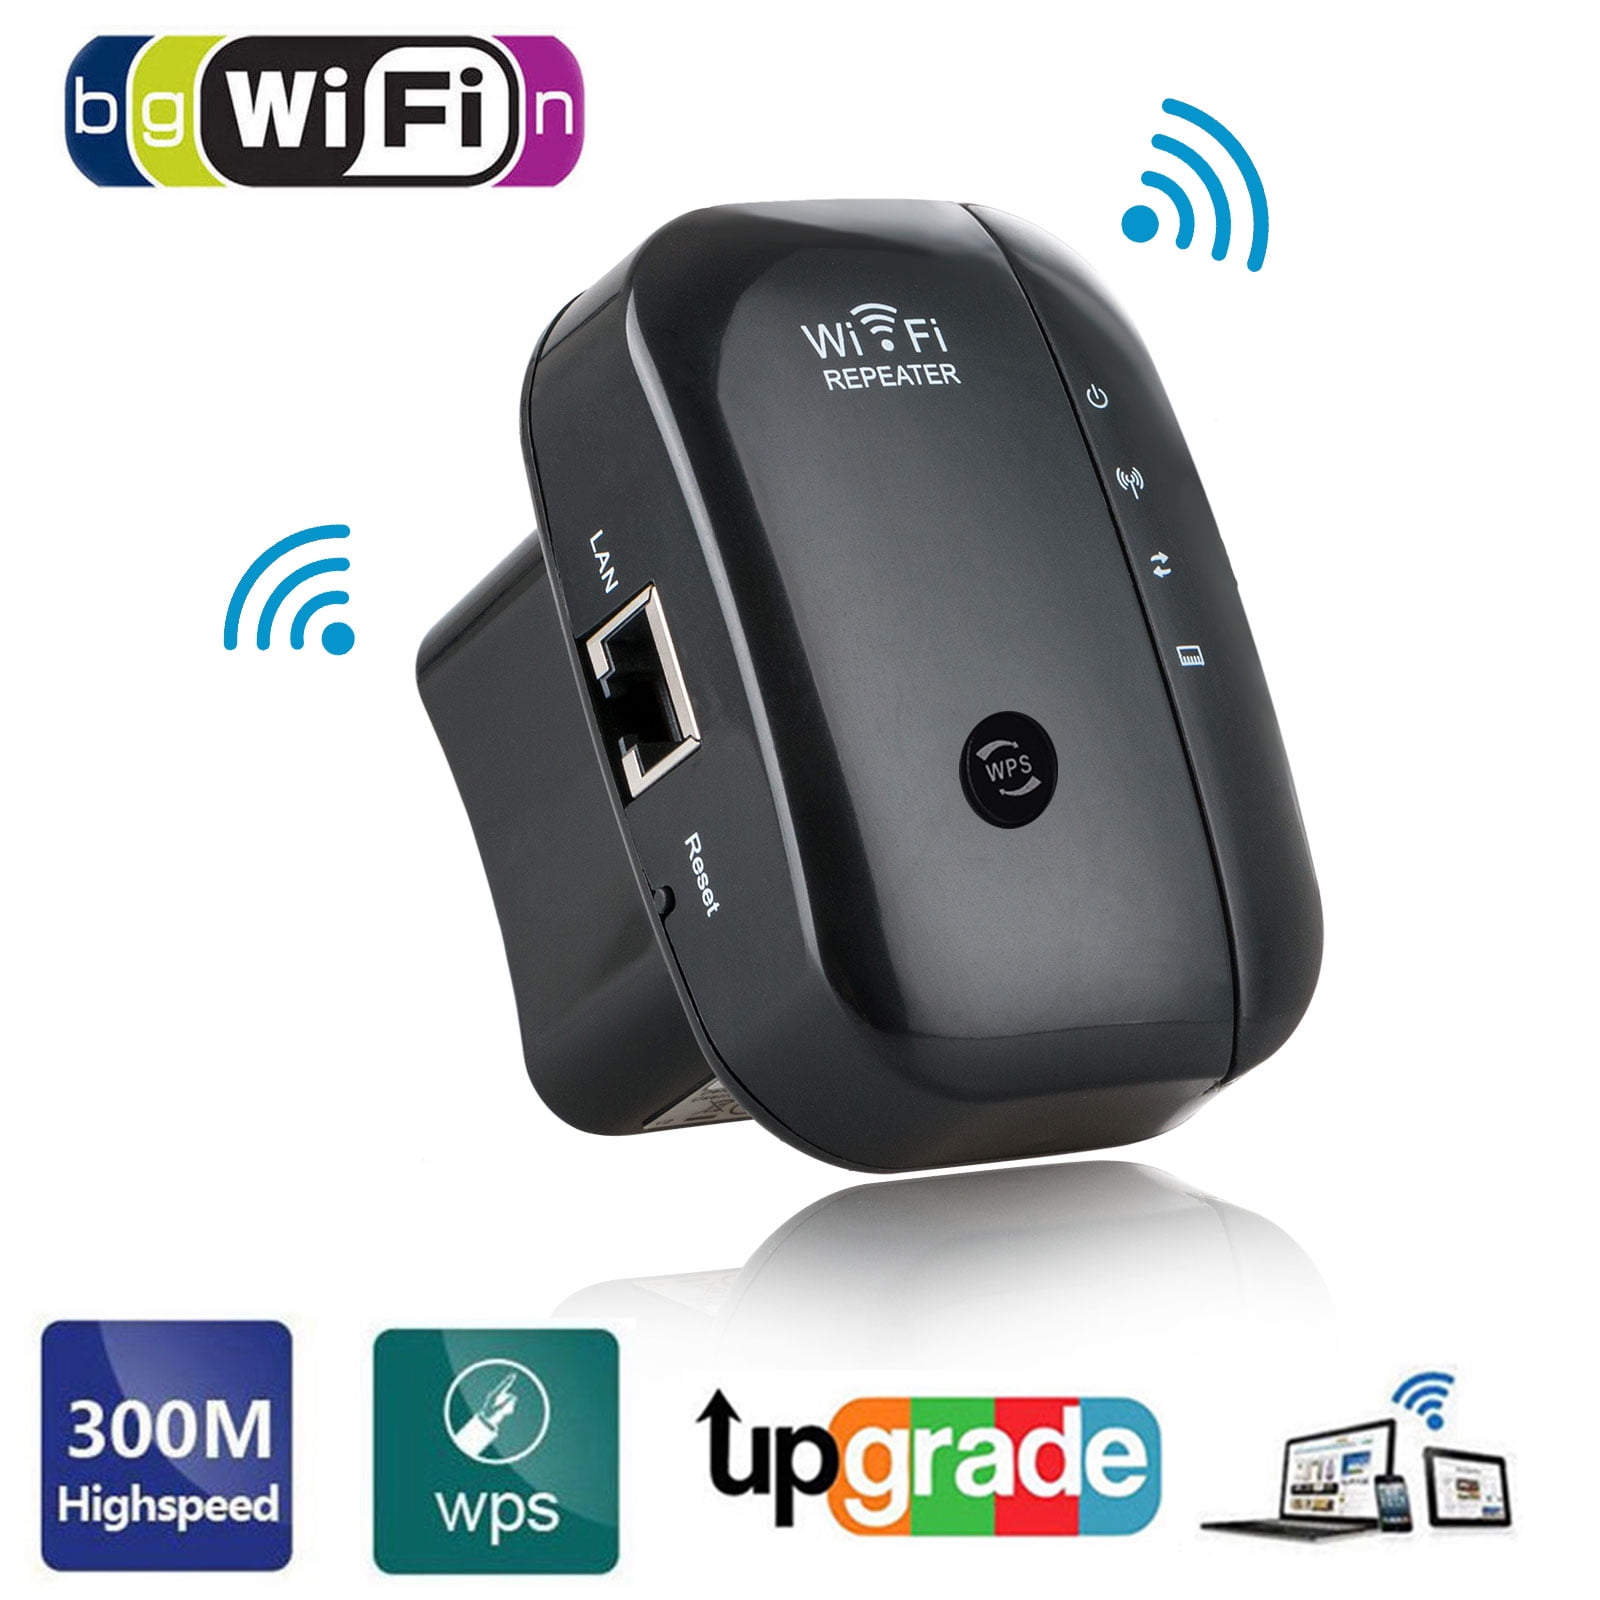 Mini WiFi Repeater, Extender Wireless 300Mbps Access Point 2.4GHz High Speed Network Modes, with Ethernet Port WiFi Signal Internet Booster Compatible Alexas, US - Walmart.com